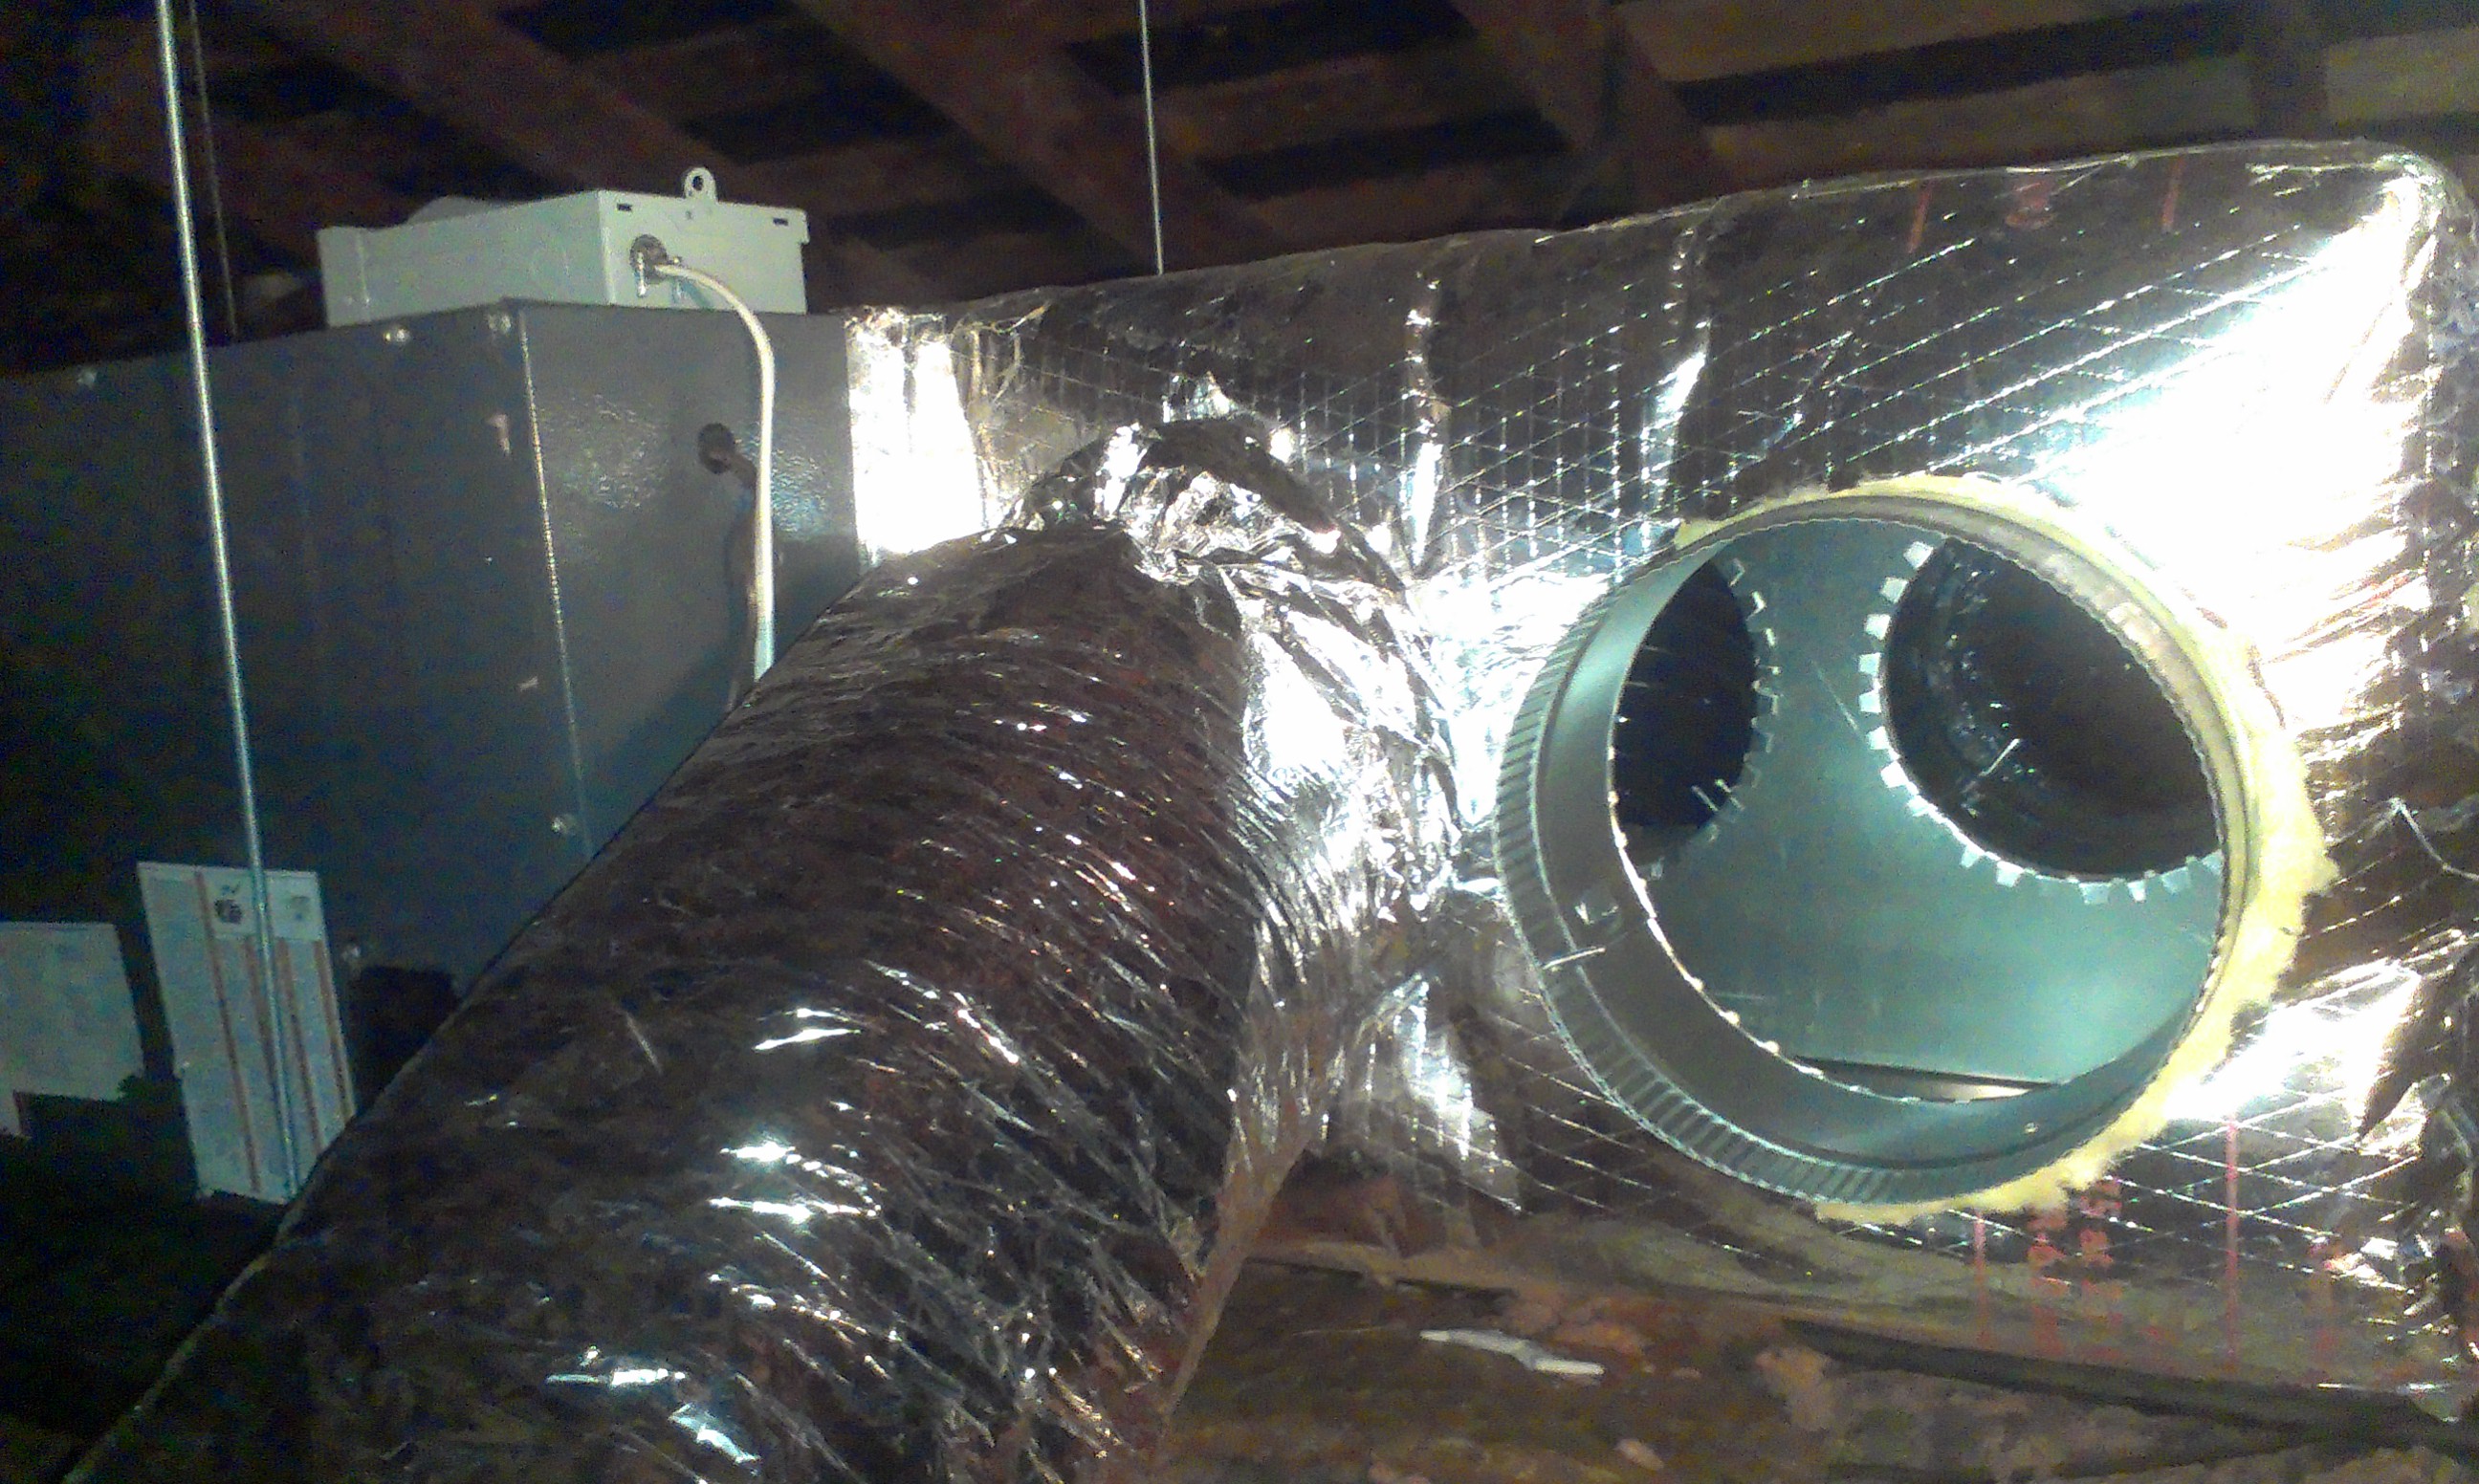 Attic mounted system being installed. No insulation inside the ducts! All exterior insulated R8